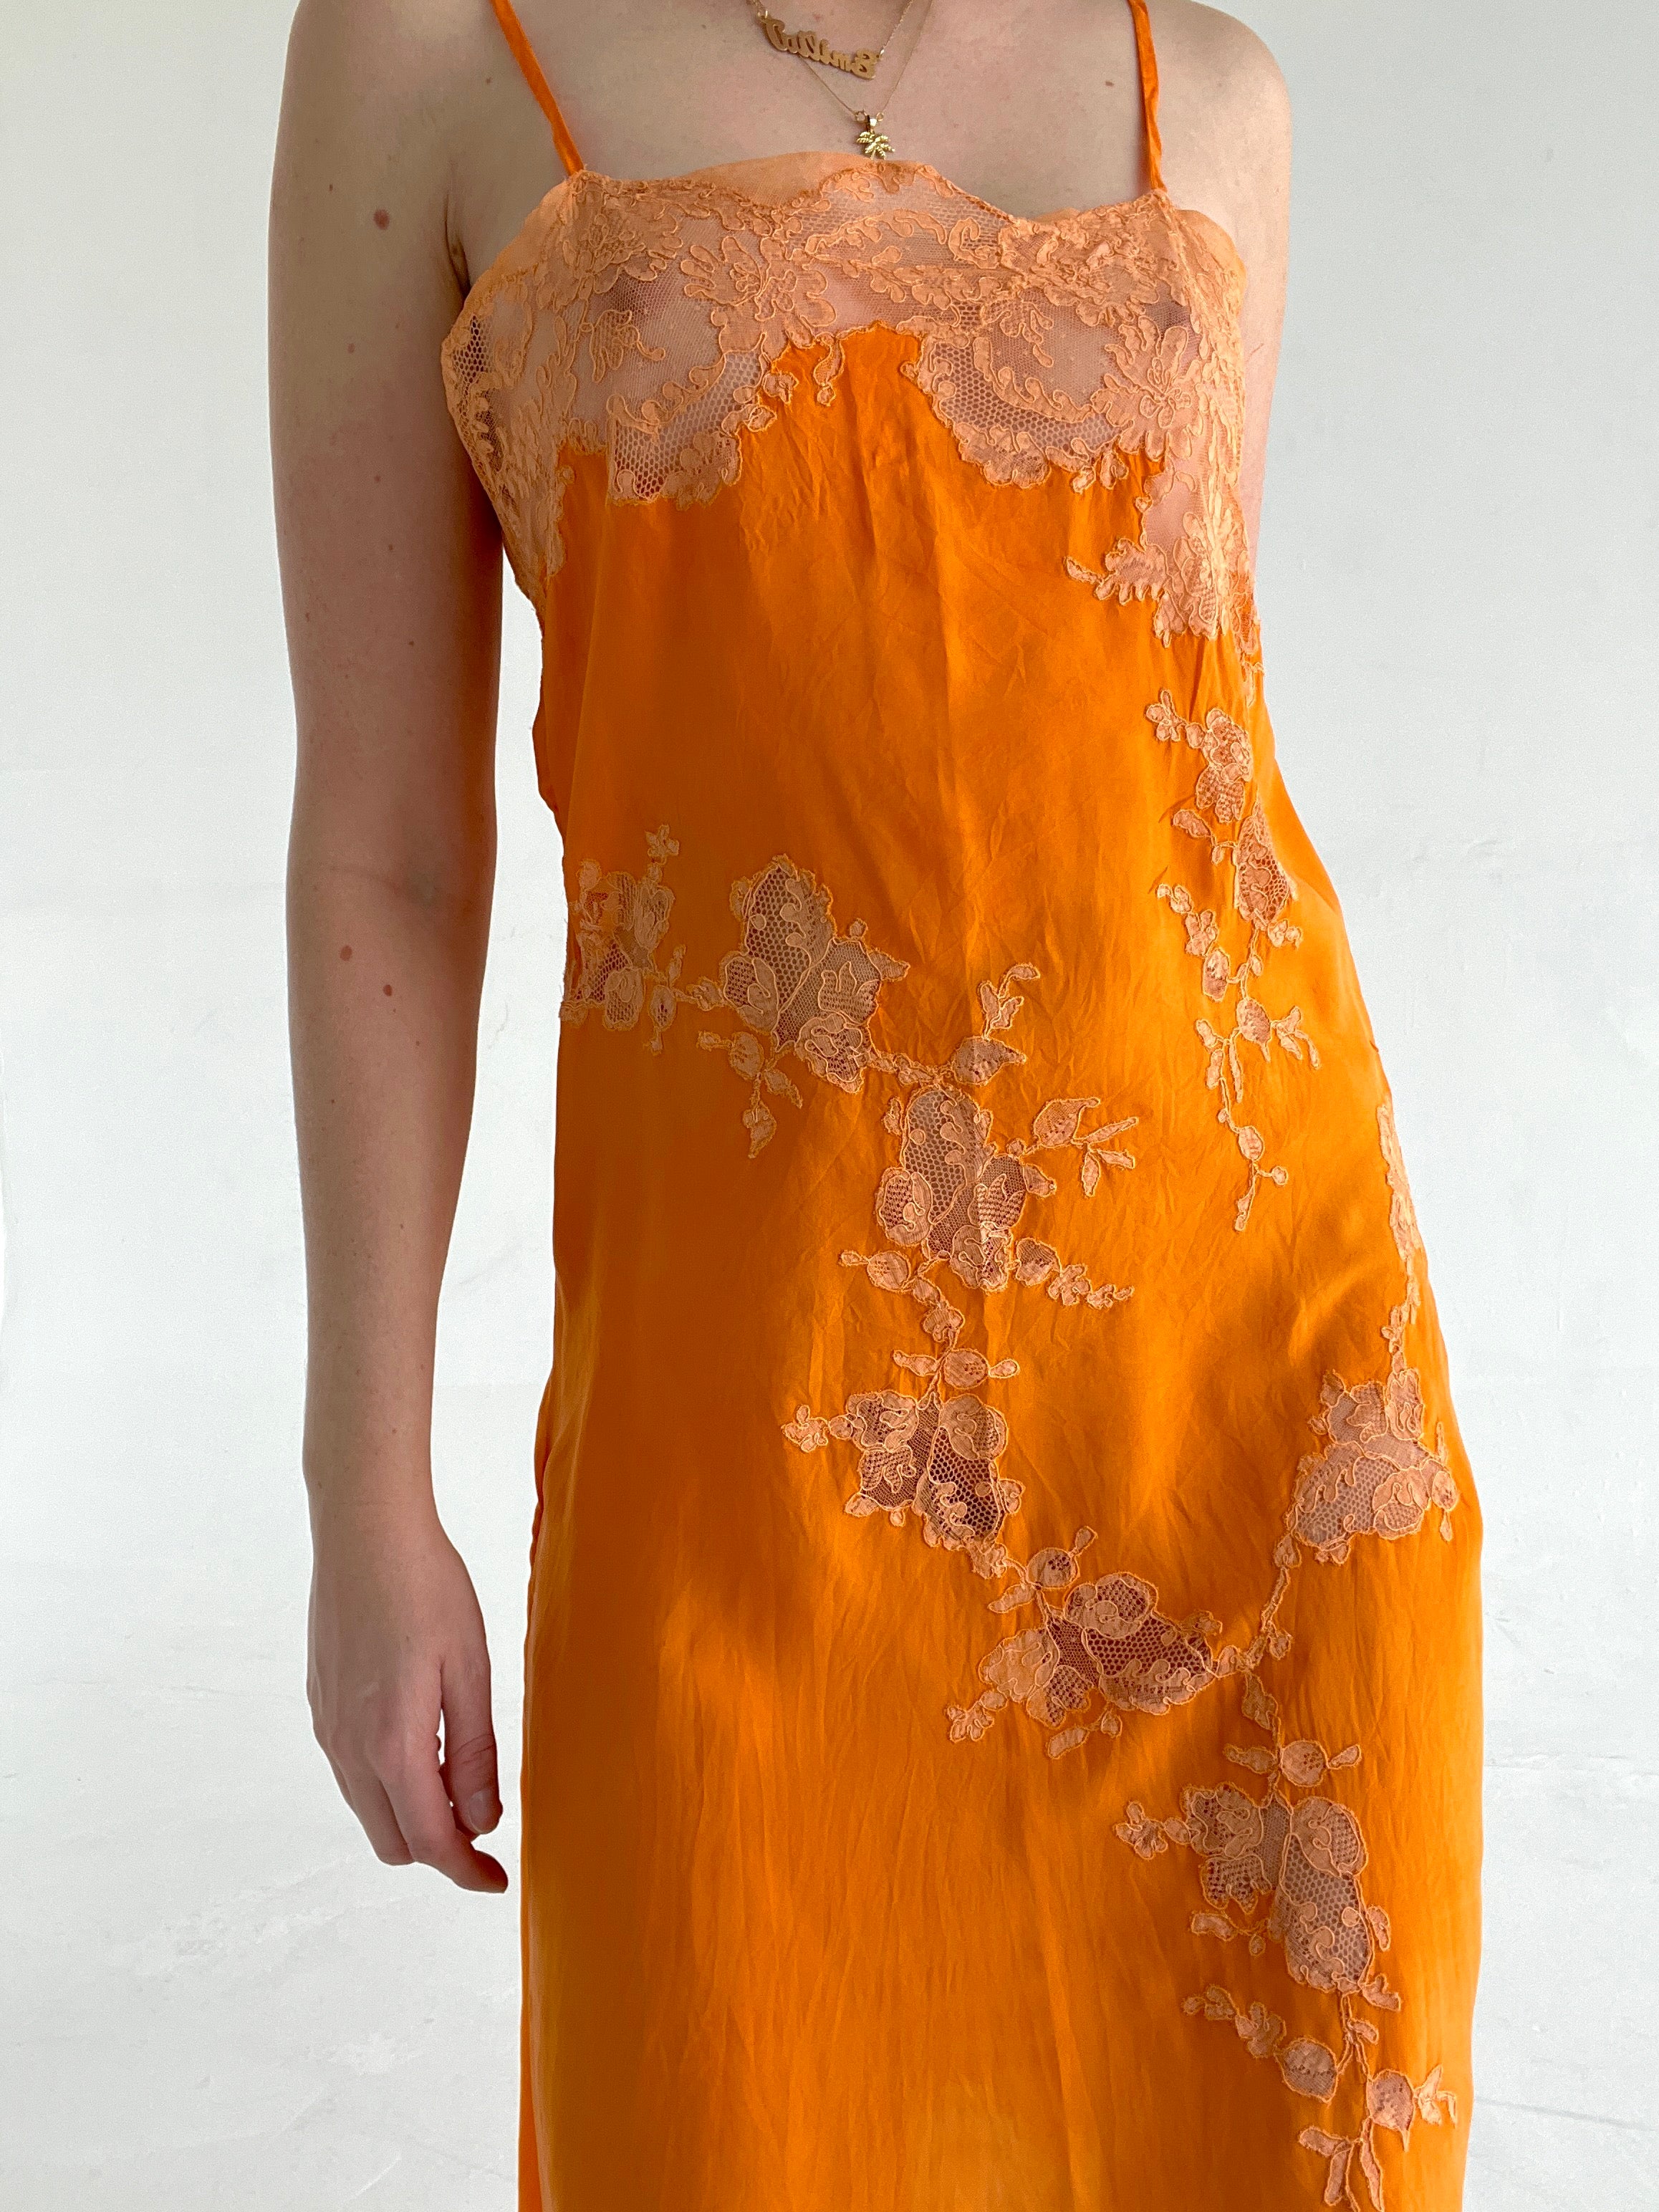 Hand Dyed Orange Silk Slip with Lace Inserts